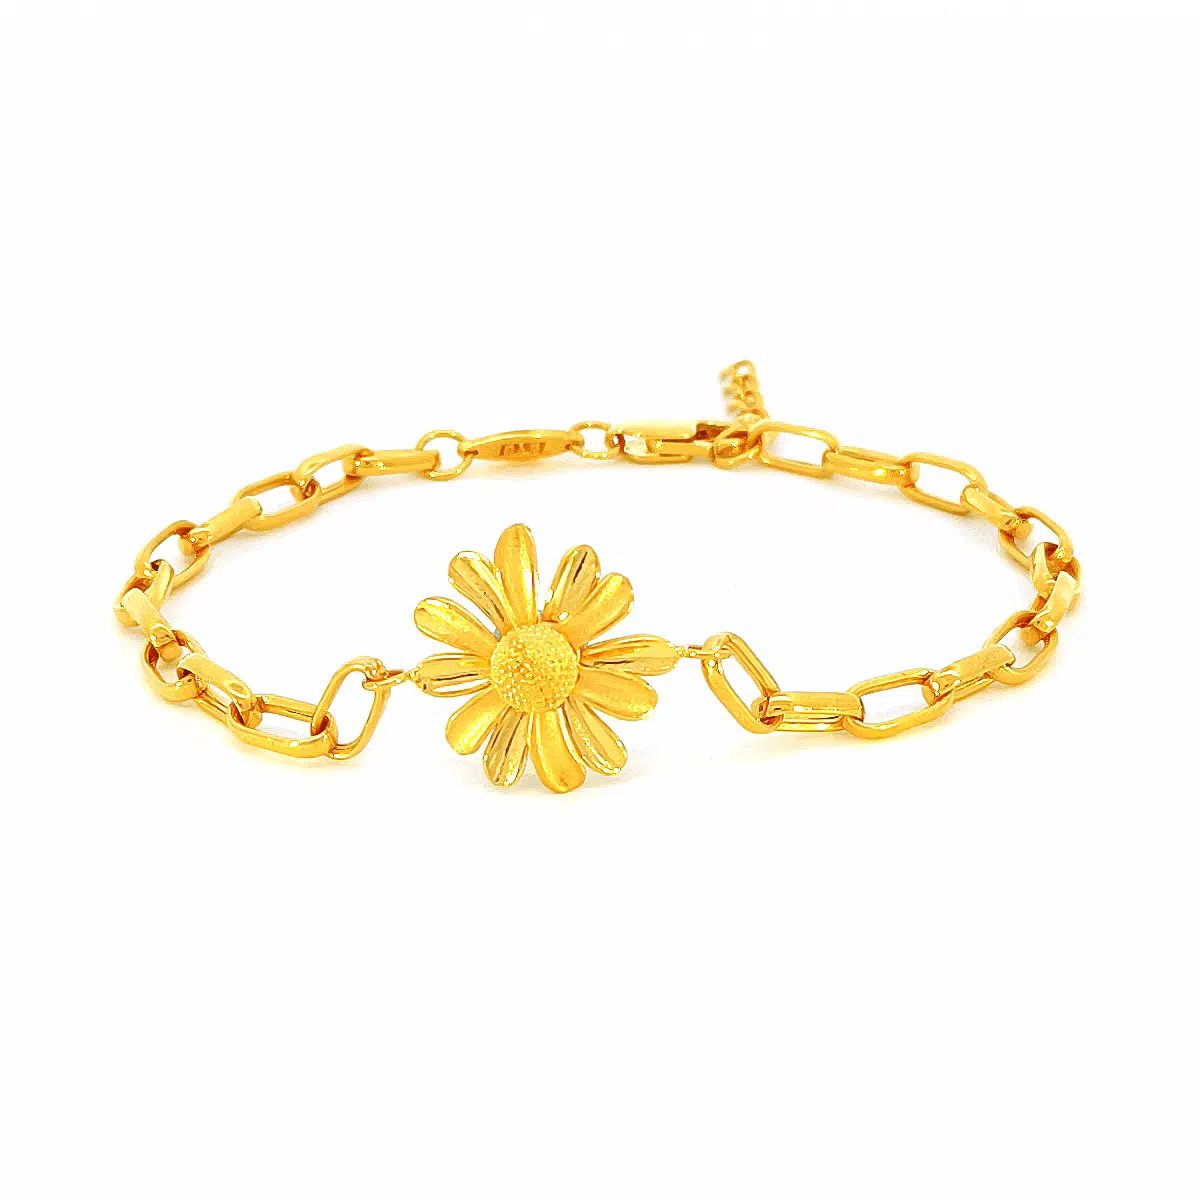 SK BRACELET FOR WOMEN SUNFLOWER DELIGHT an adorable classic chain bracelet with a sunflower as a charm made out of 916 gold